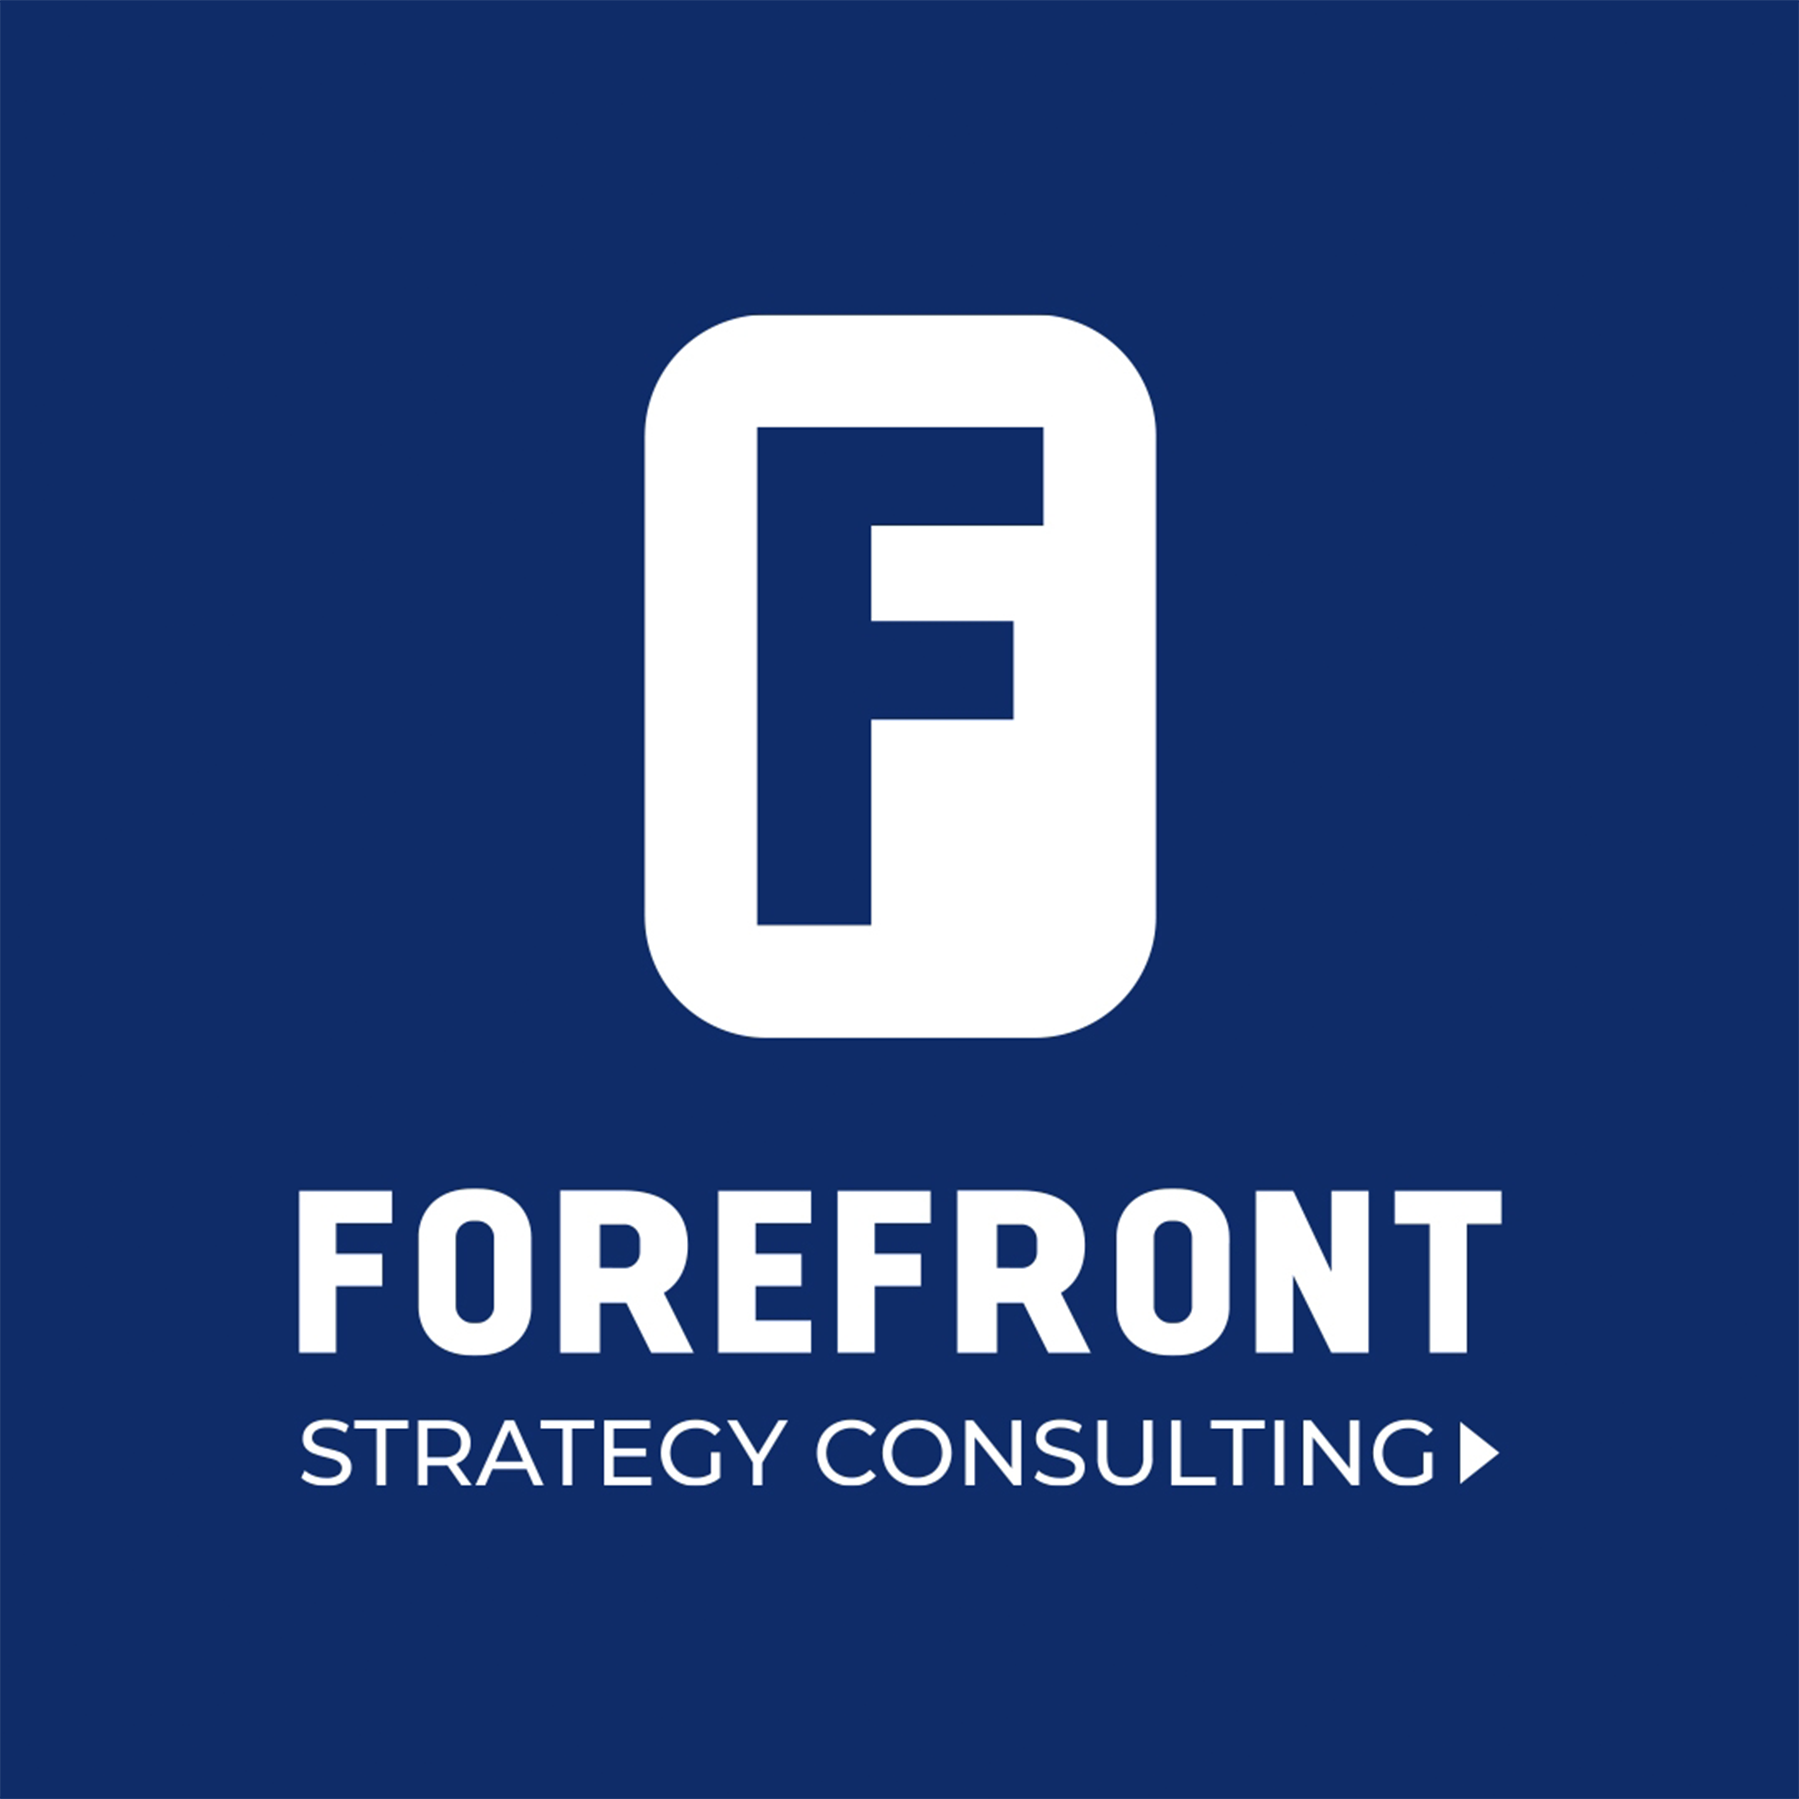 Forefront for consulting services